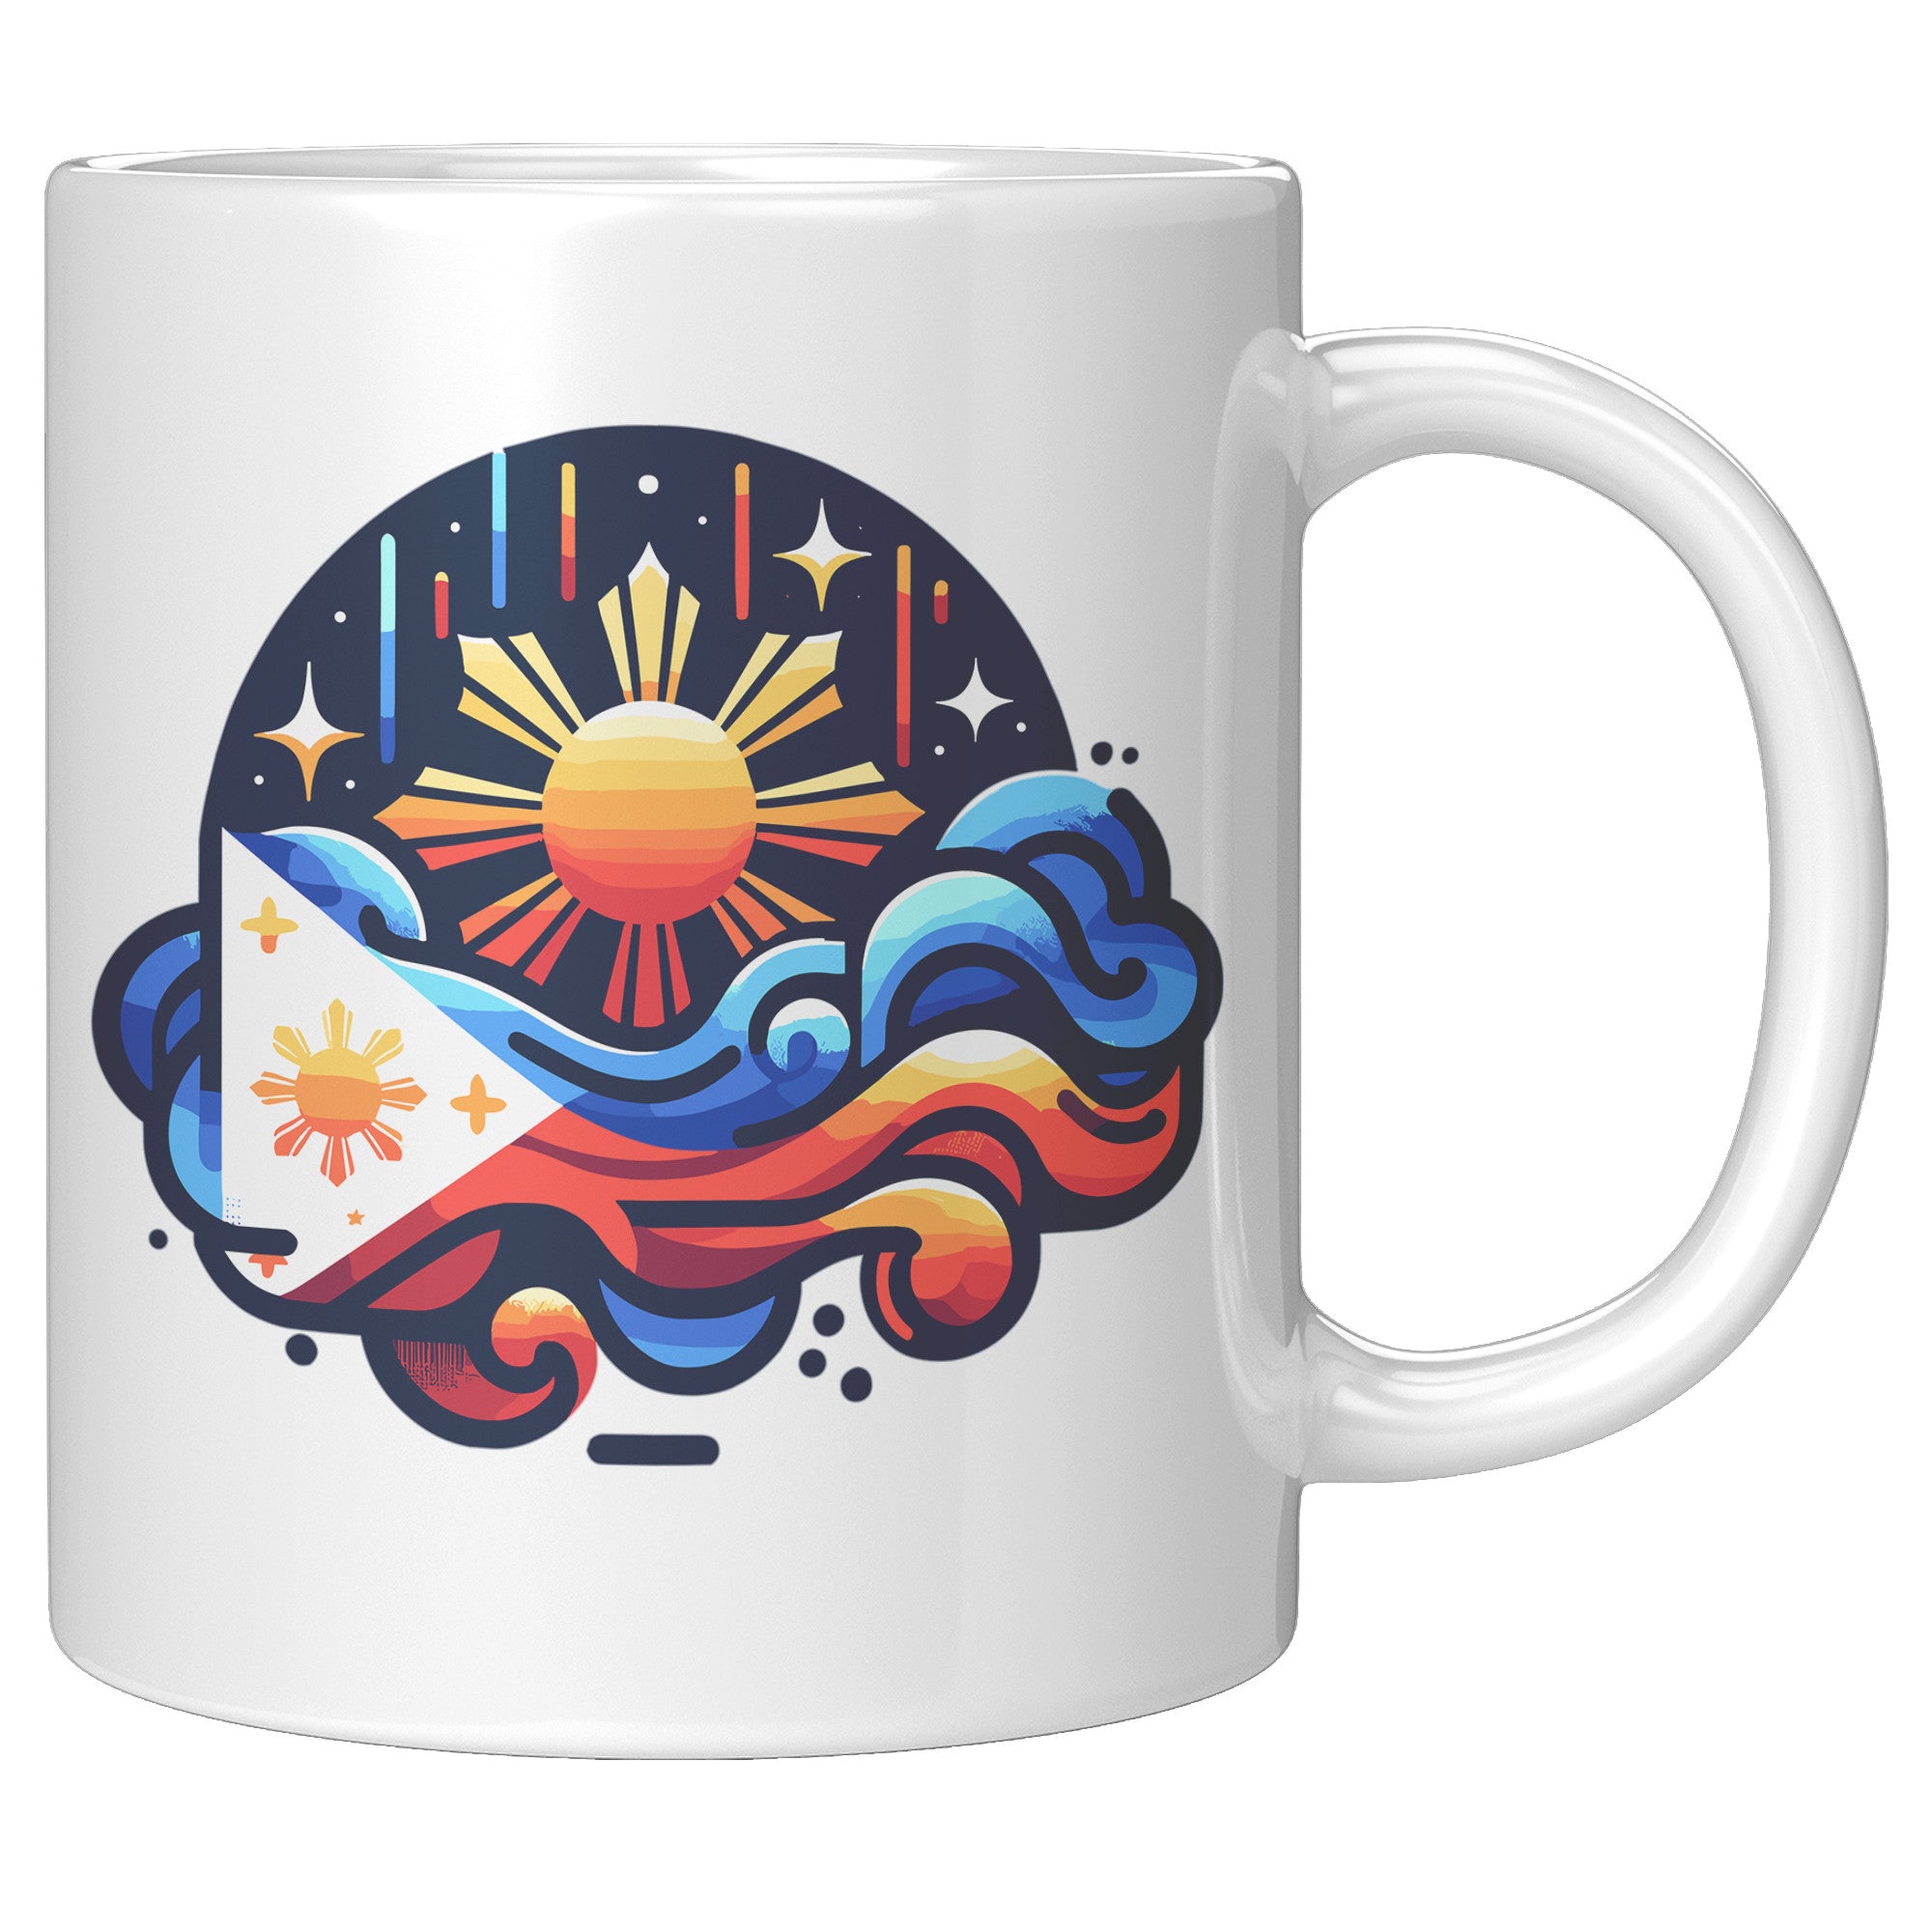 Proudly Pinoy Coffee Mug - Vibrant Filipino Flag Design - Patriotic Gift for Filipinos - Celebrate Heritage with Every Sip!" - A